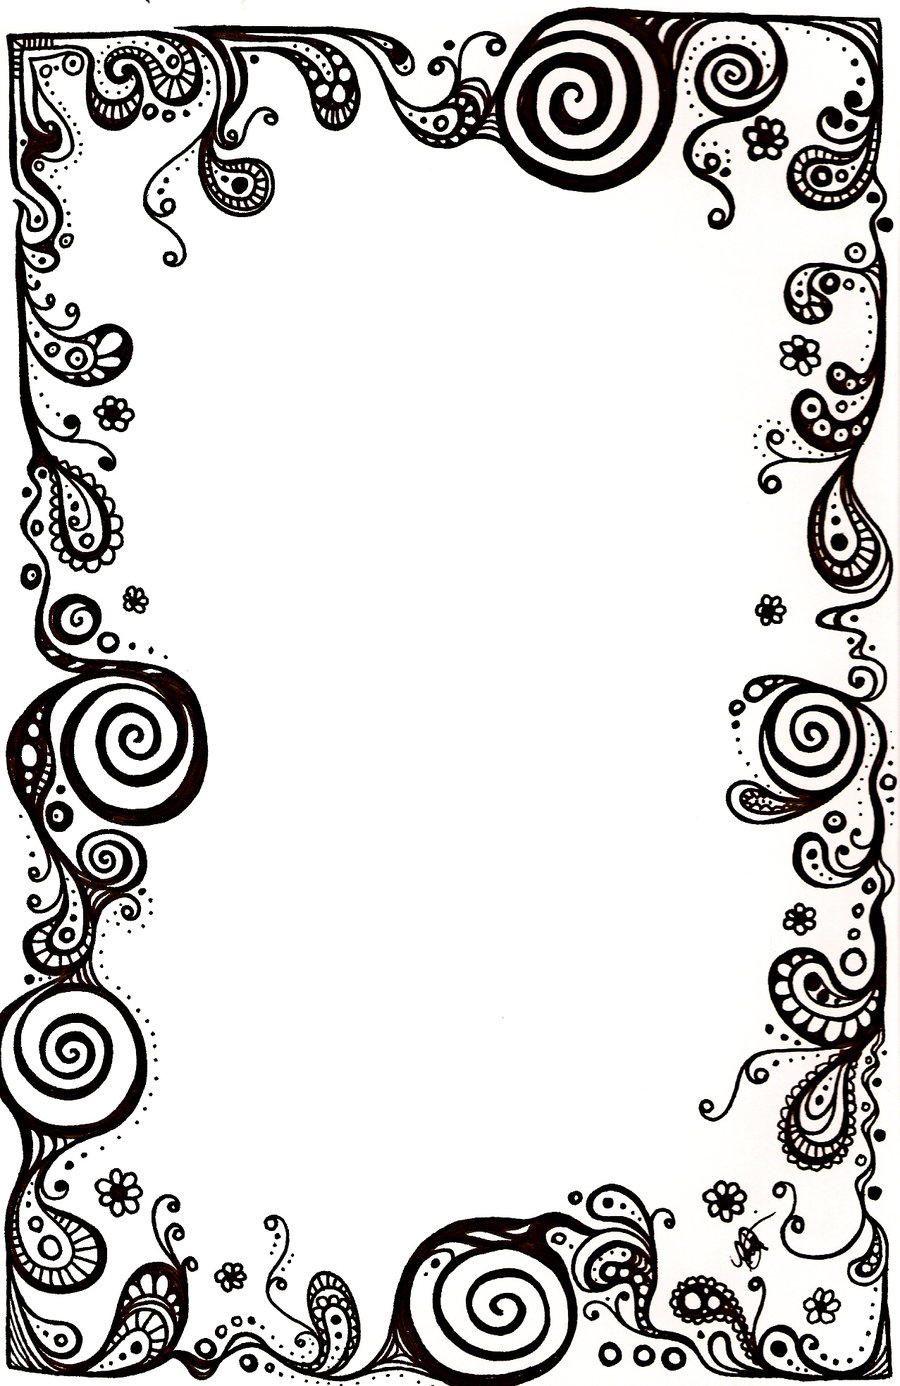 clip art borders and frames black and white - photo #37